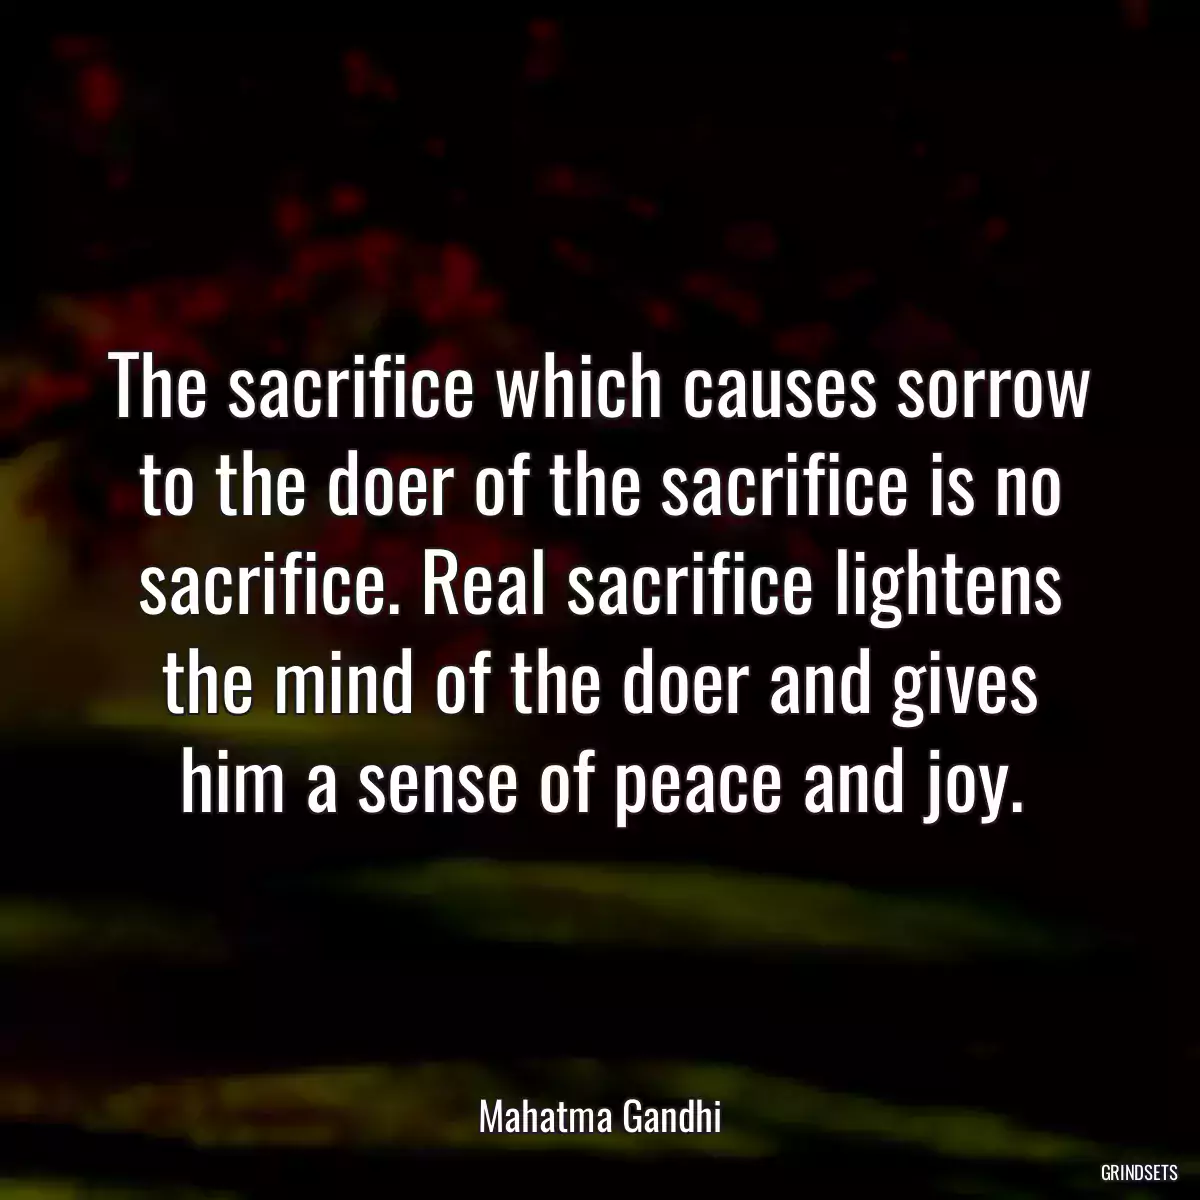 The sacrifice which causes sorrow to the doer of the sacrifice is no sacrifice. Real sacrifice lightens the mind of the doer and gives him a sense of peace and joy.